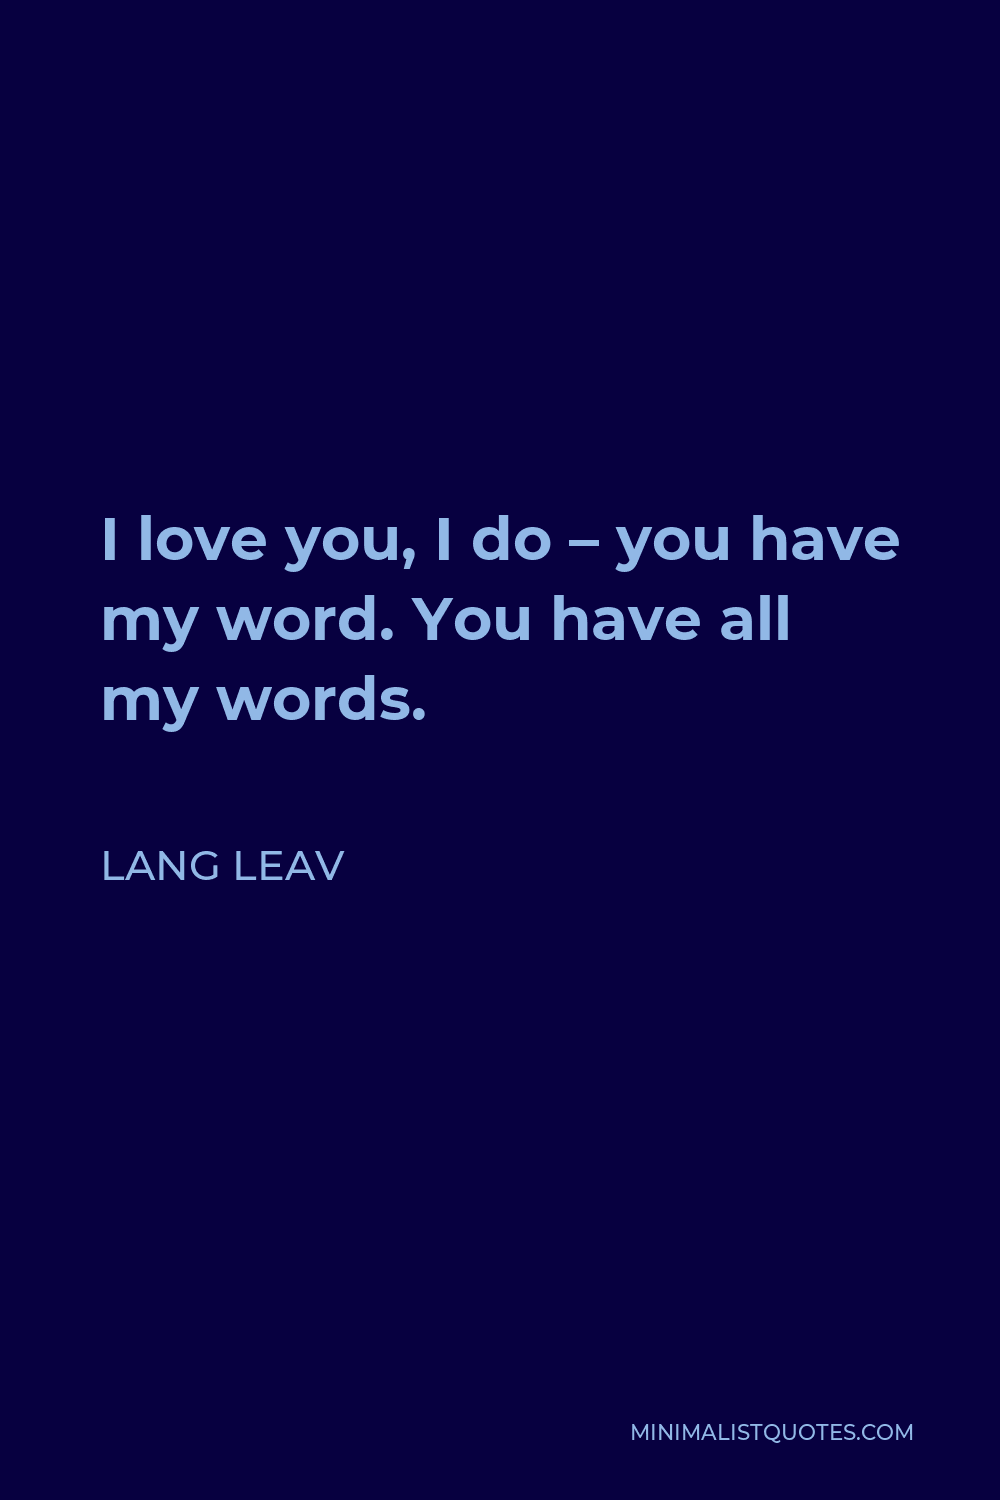 Lang Leav Quote - I love you, I do – you have my word. You have all my words.